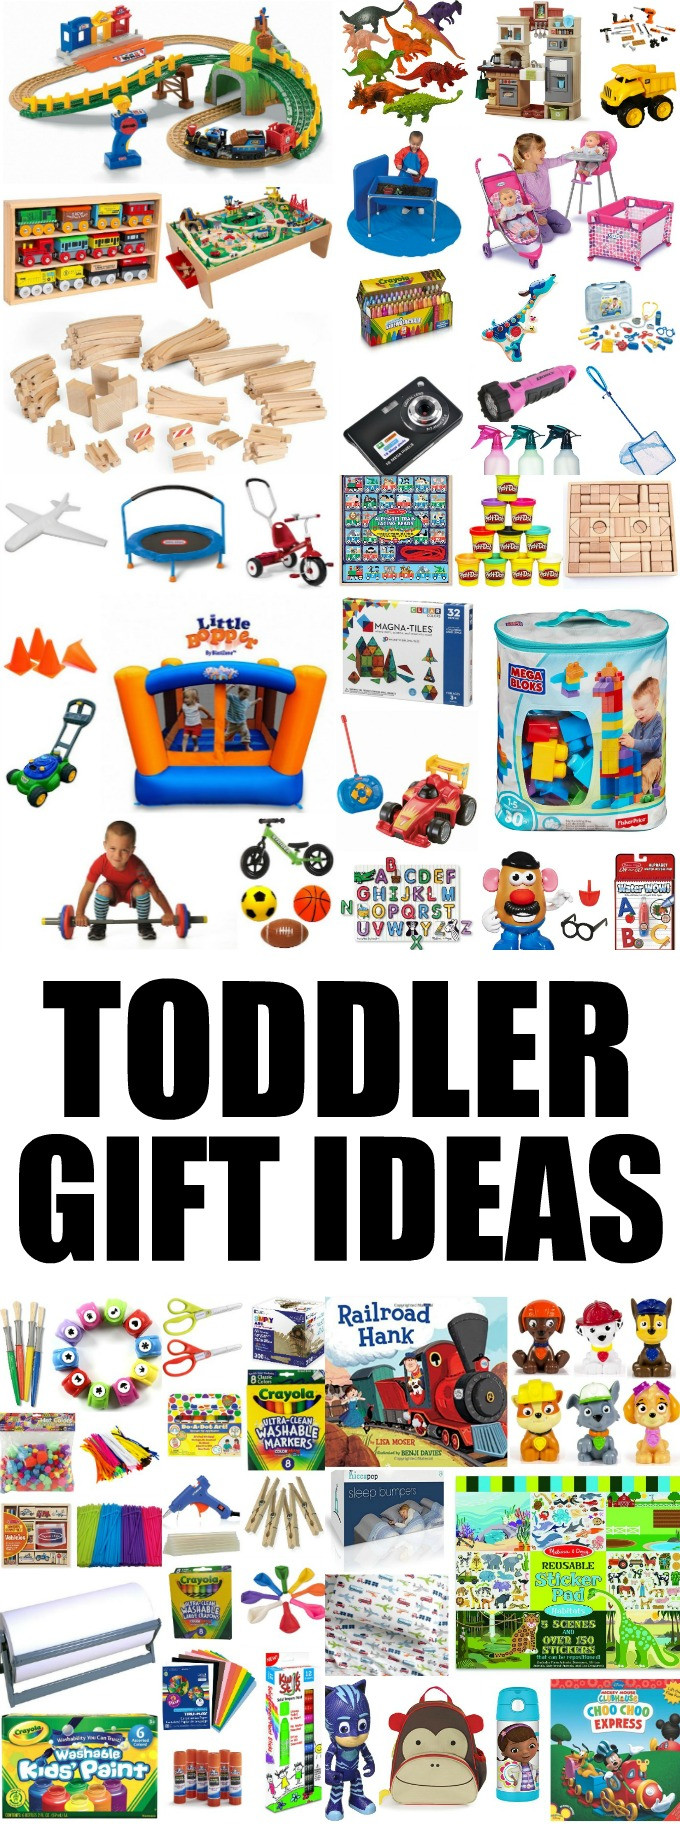 Toddler Christmas Gift Ideas
 Toddler Gift Ideas Ages 1 3